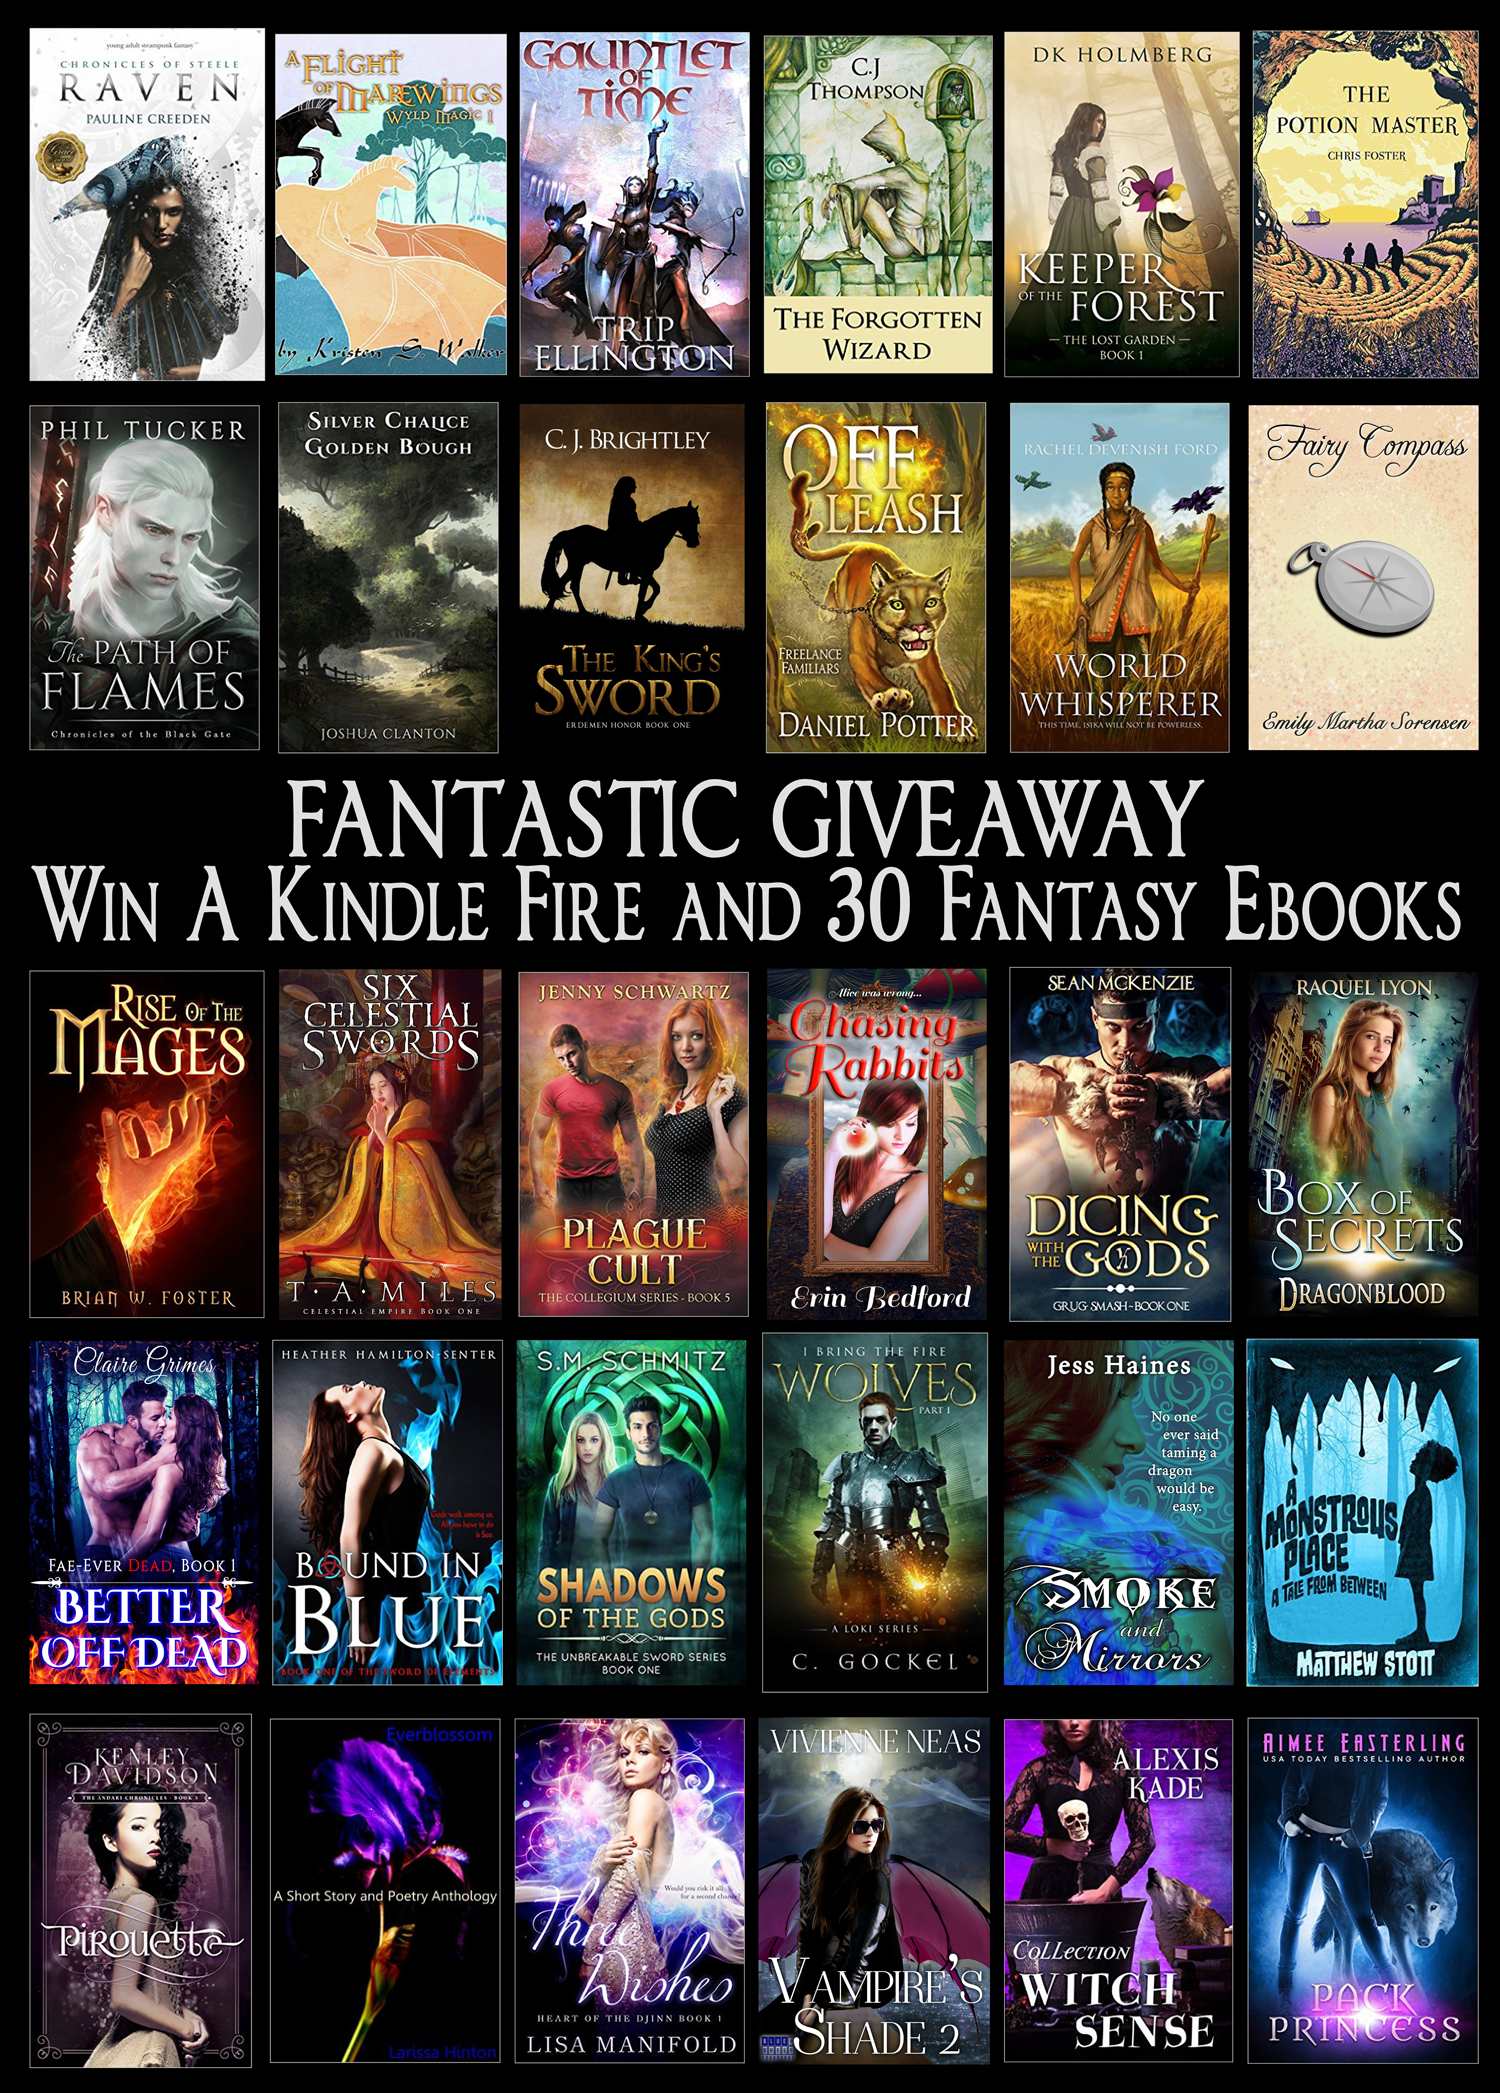 Fantastic giveaway. Win a Kindle Fire and 30 fantasy eBooks.